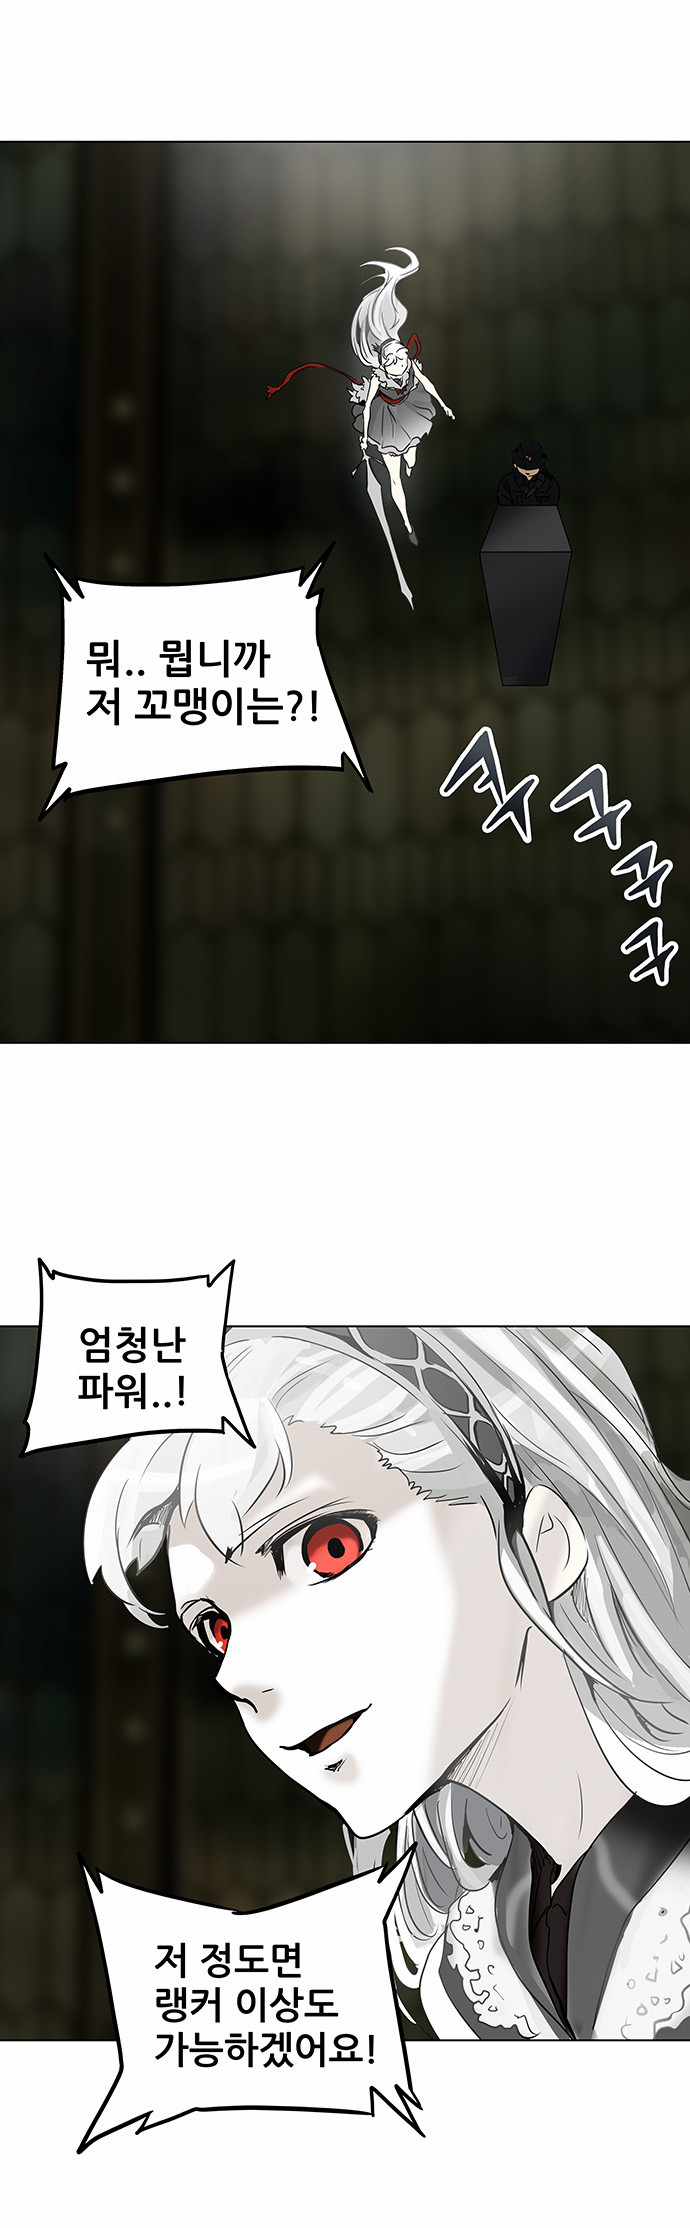 Tower of God - Chapter 270 - Page 1